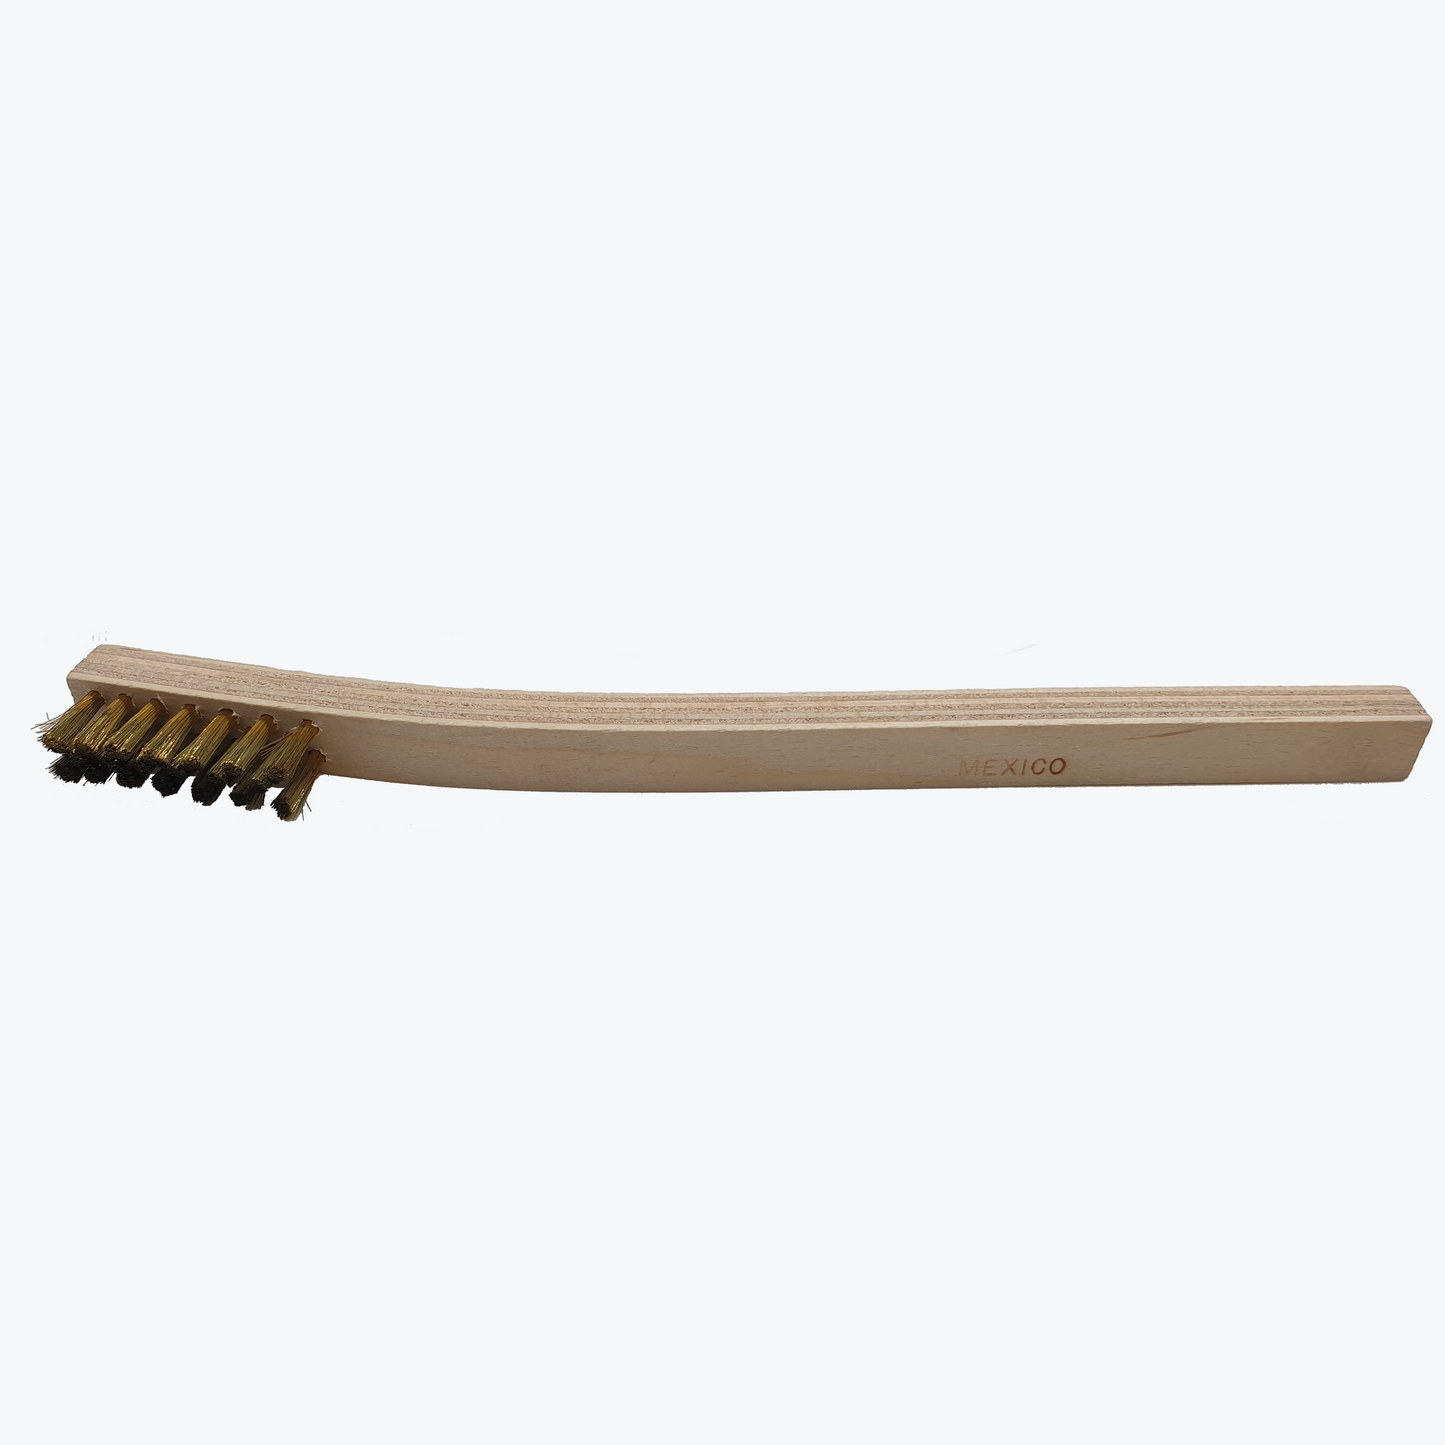 Techspray soft brass wooden handle esd safe antistatic brush 2025-1 clean sensitive pcb